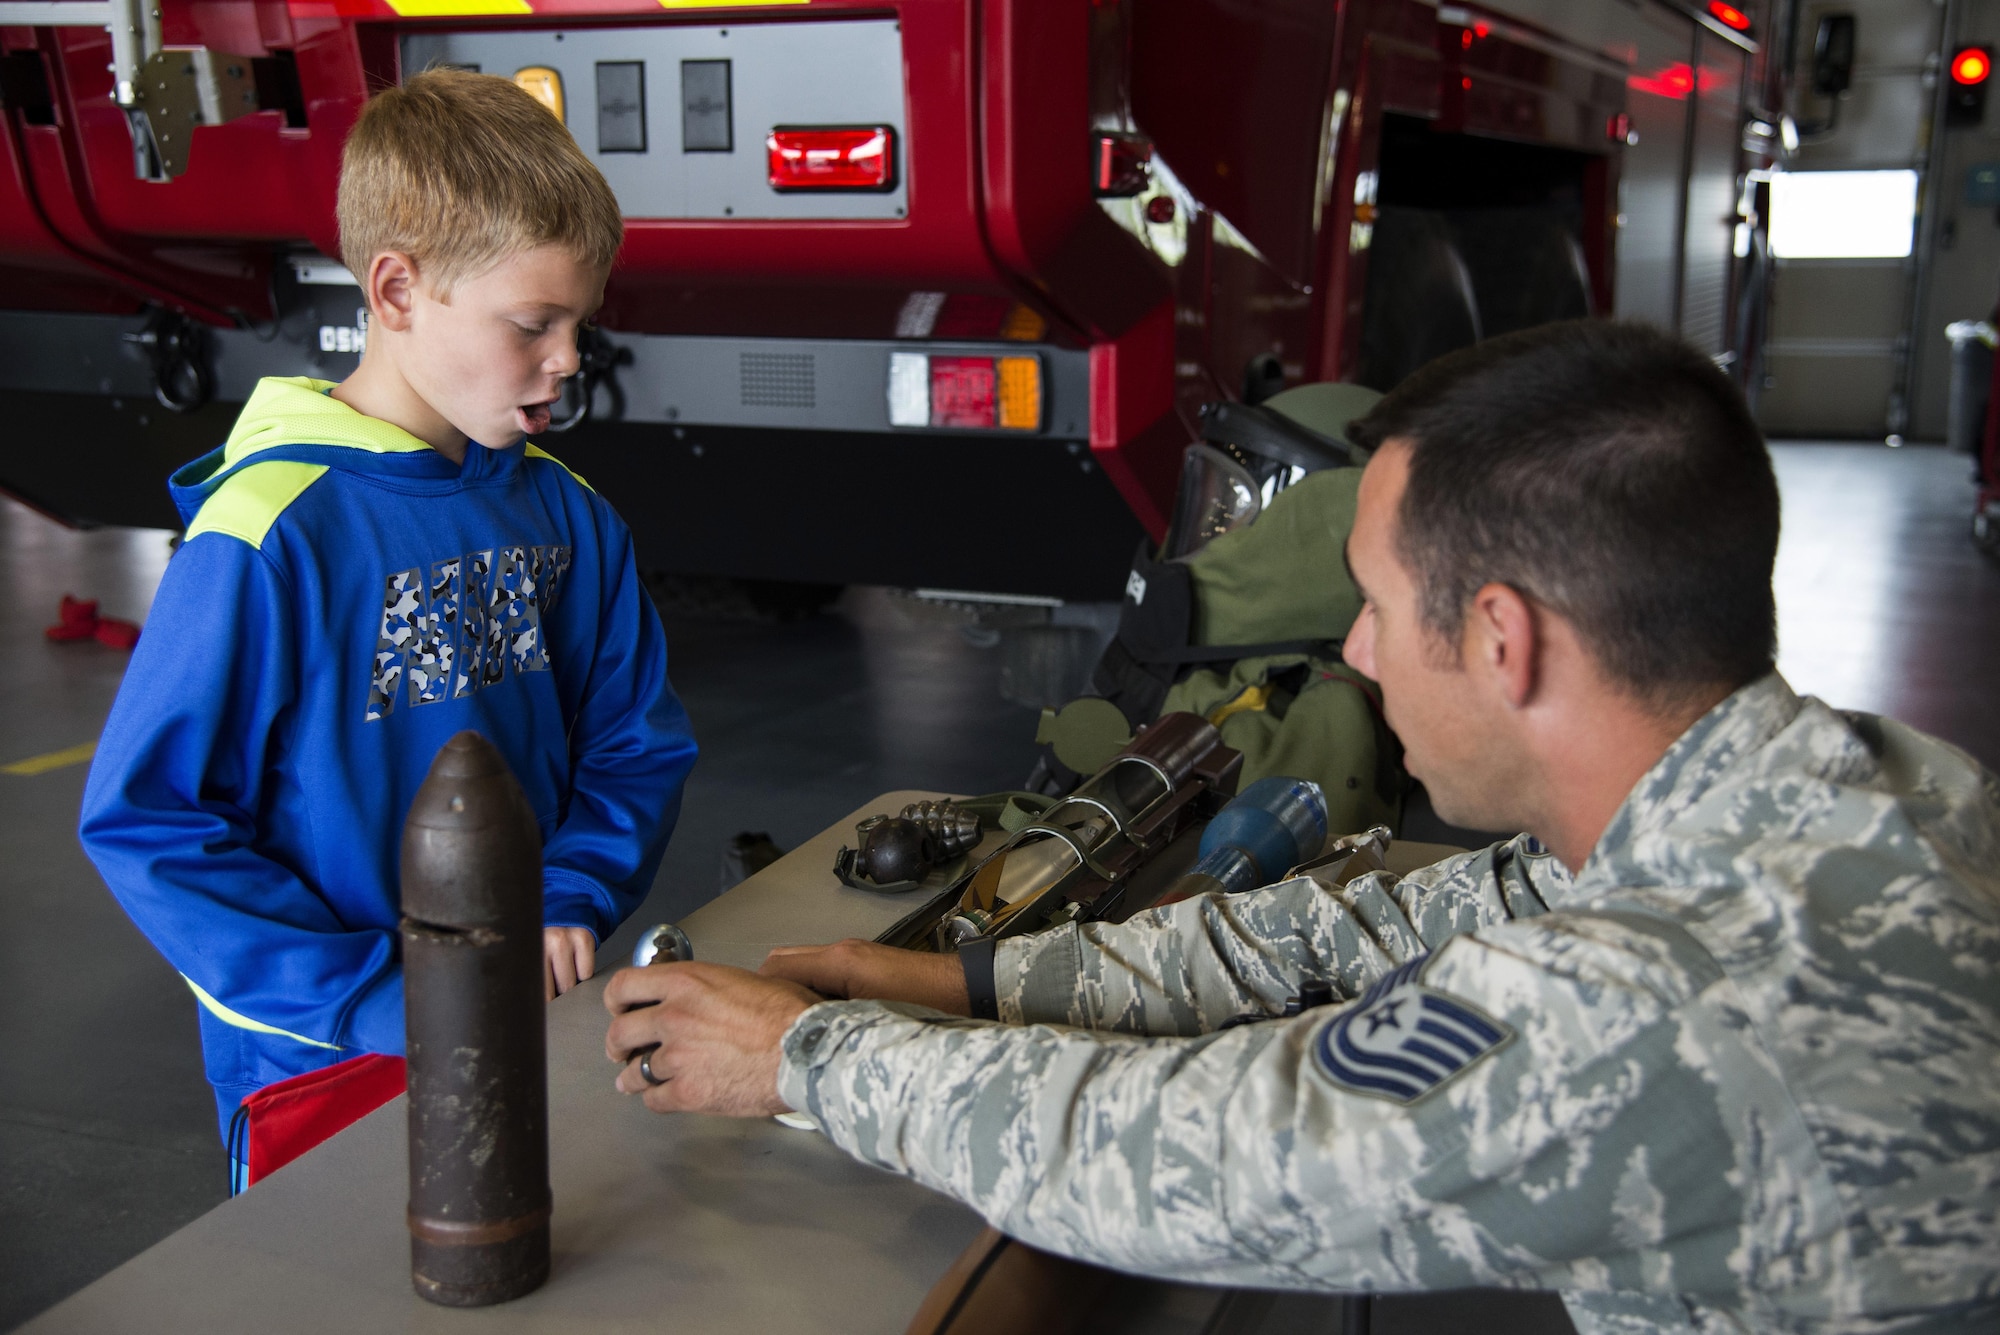 Tech. Sgt. Donald Manuel, 436th Civil Engineer Squadron explosives ordnance disposal craftsman, explains his job to Merric Hunt, son of Master Sgt. Adam Hunt, 436th Maintenance Squadron Isochronal Maintenance Dock chief, during the Dover Air Force Base First Responders’ Special Needs Day Oct. 8, 2016, at the 436th Civil Engineer Squadron Fire Department on Dover AFB, Del. Members of the 436th CES EOD, 436th Security Forces Squadron and 436th Medical Group set up displays and provided tours of their emergency response vehicles. (U.S. Air Force photo by Senior Airman Aaron J. Jenne)